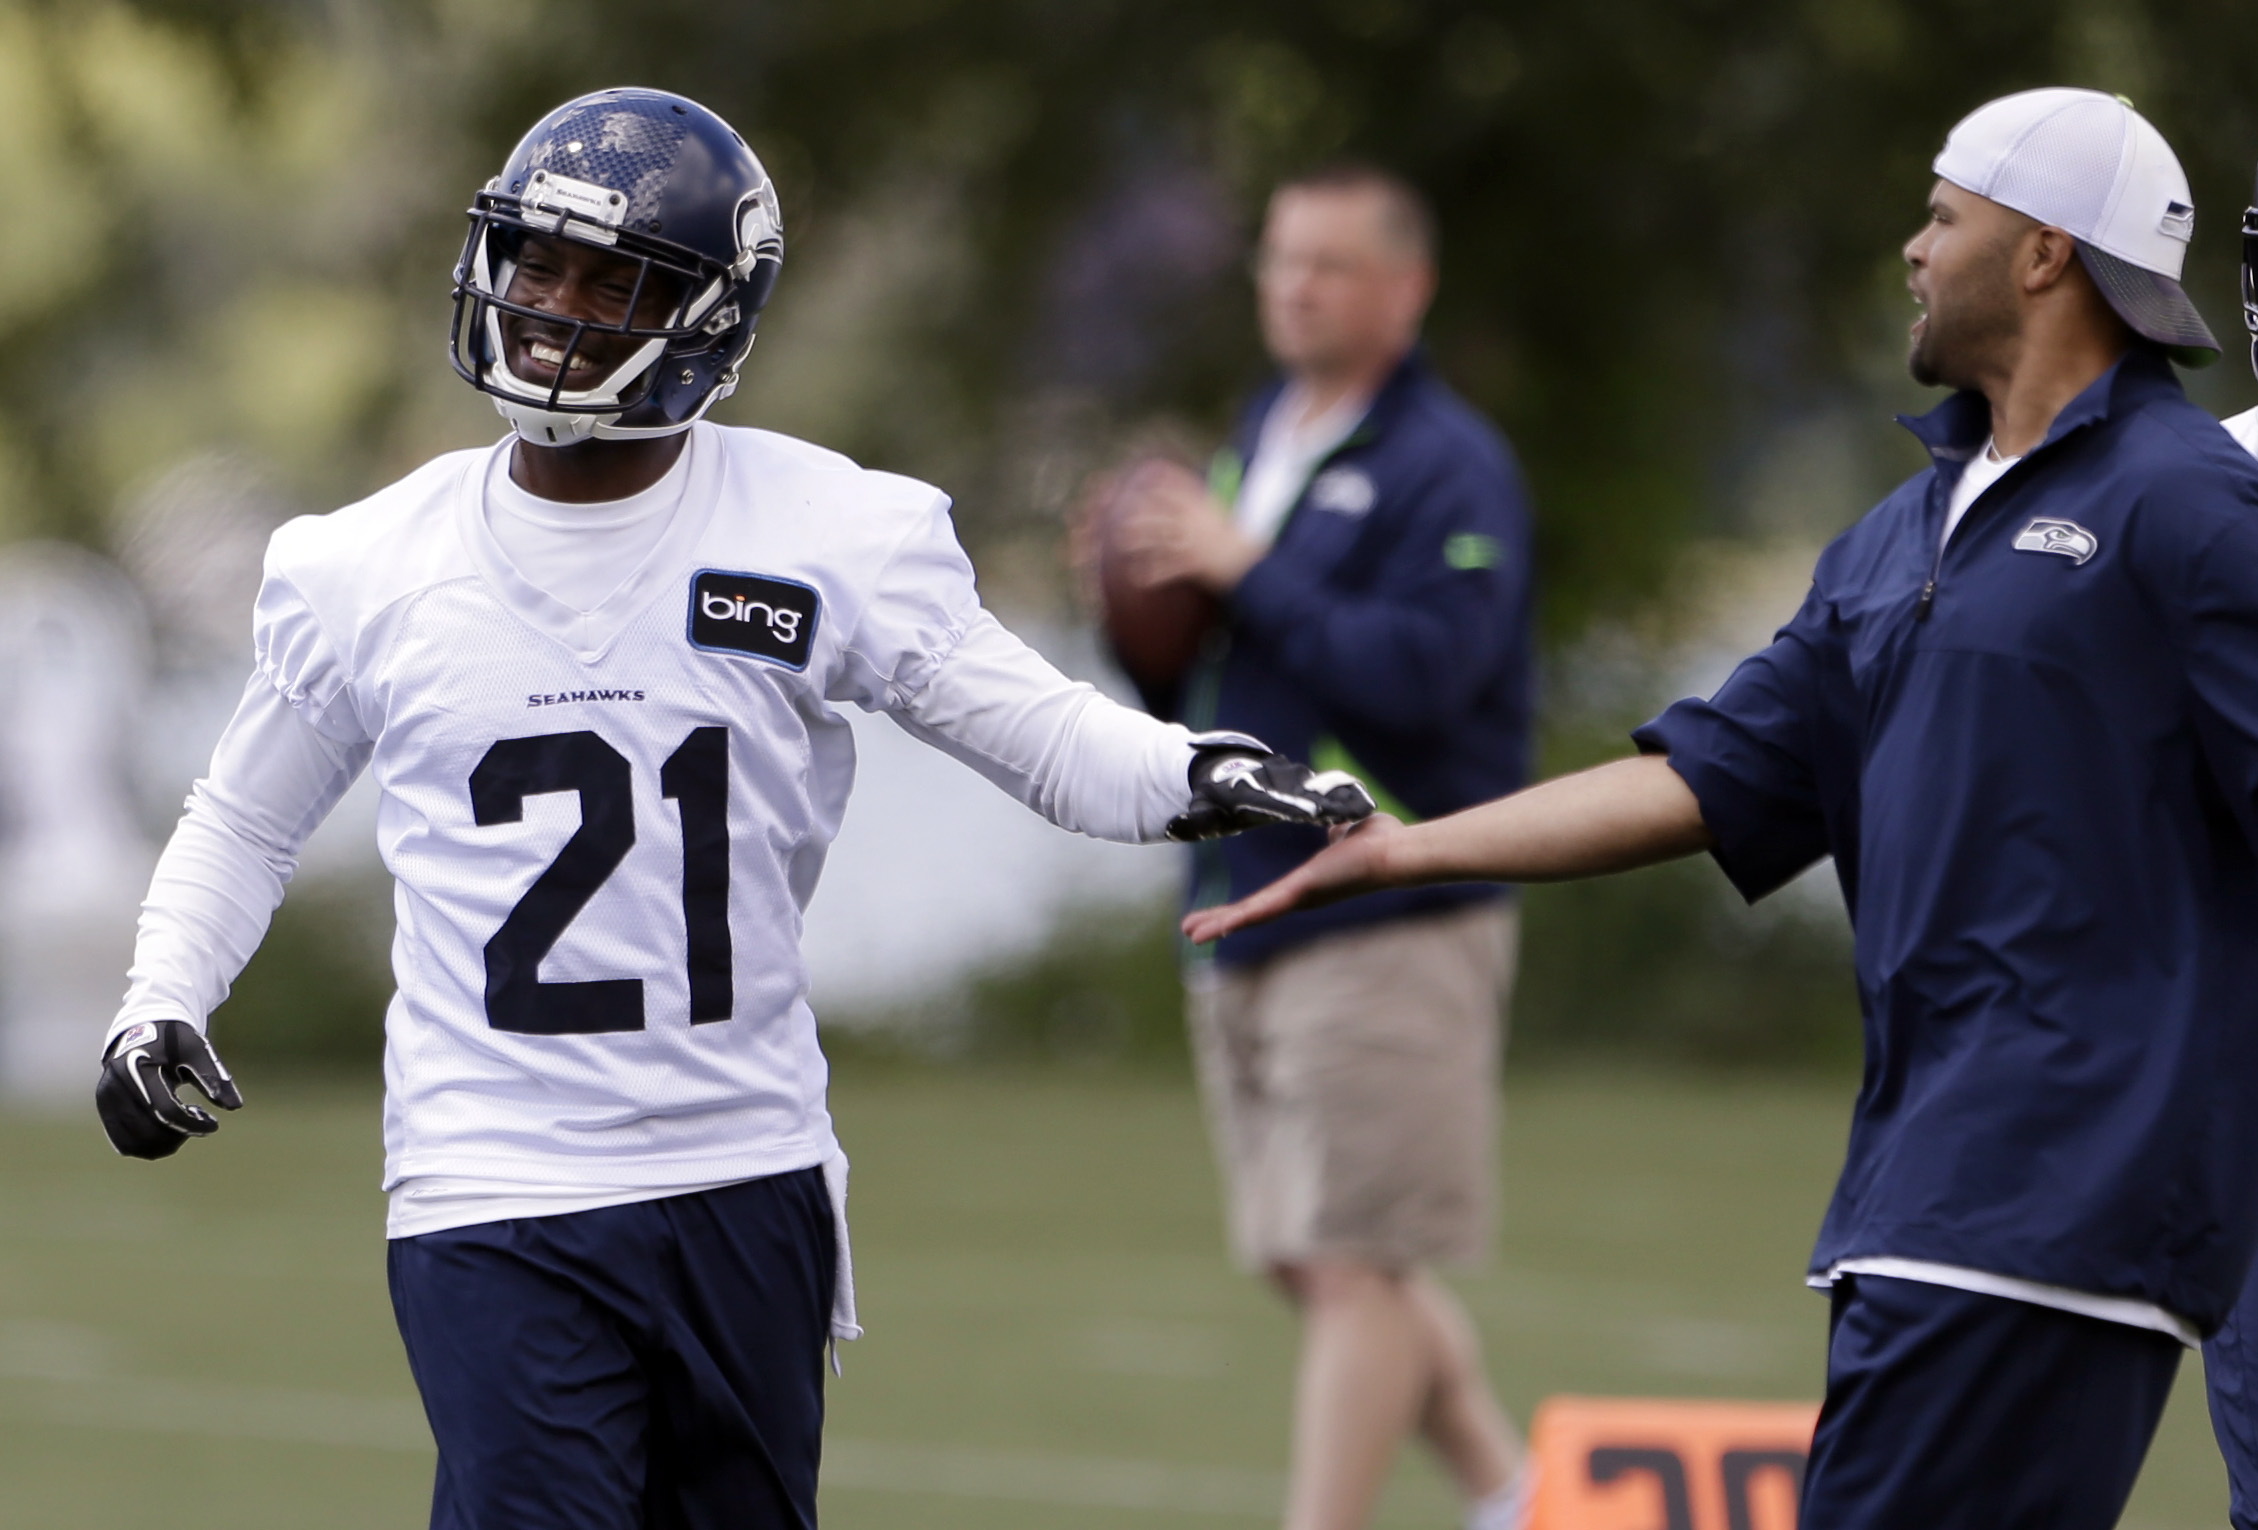 Seattle Seahawks' Antoine Winfield (21) is congratulated by secondary coach Kris Richard after a turn at scrimmage during an NFL football minicamp on Wednesday, June 12, 2013, in Renton, Wash (AP Photo/Elaine Thompson)